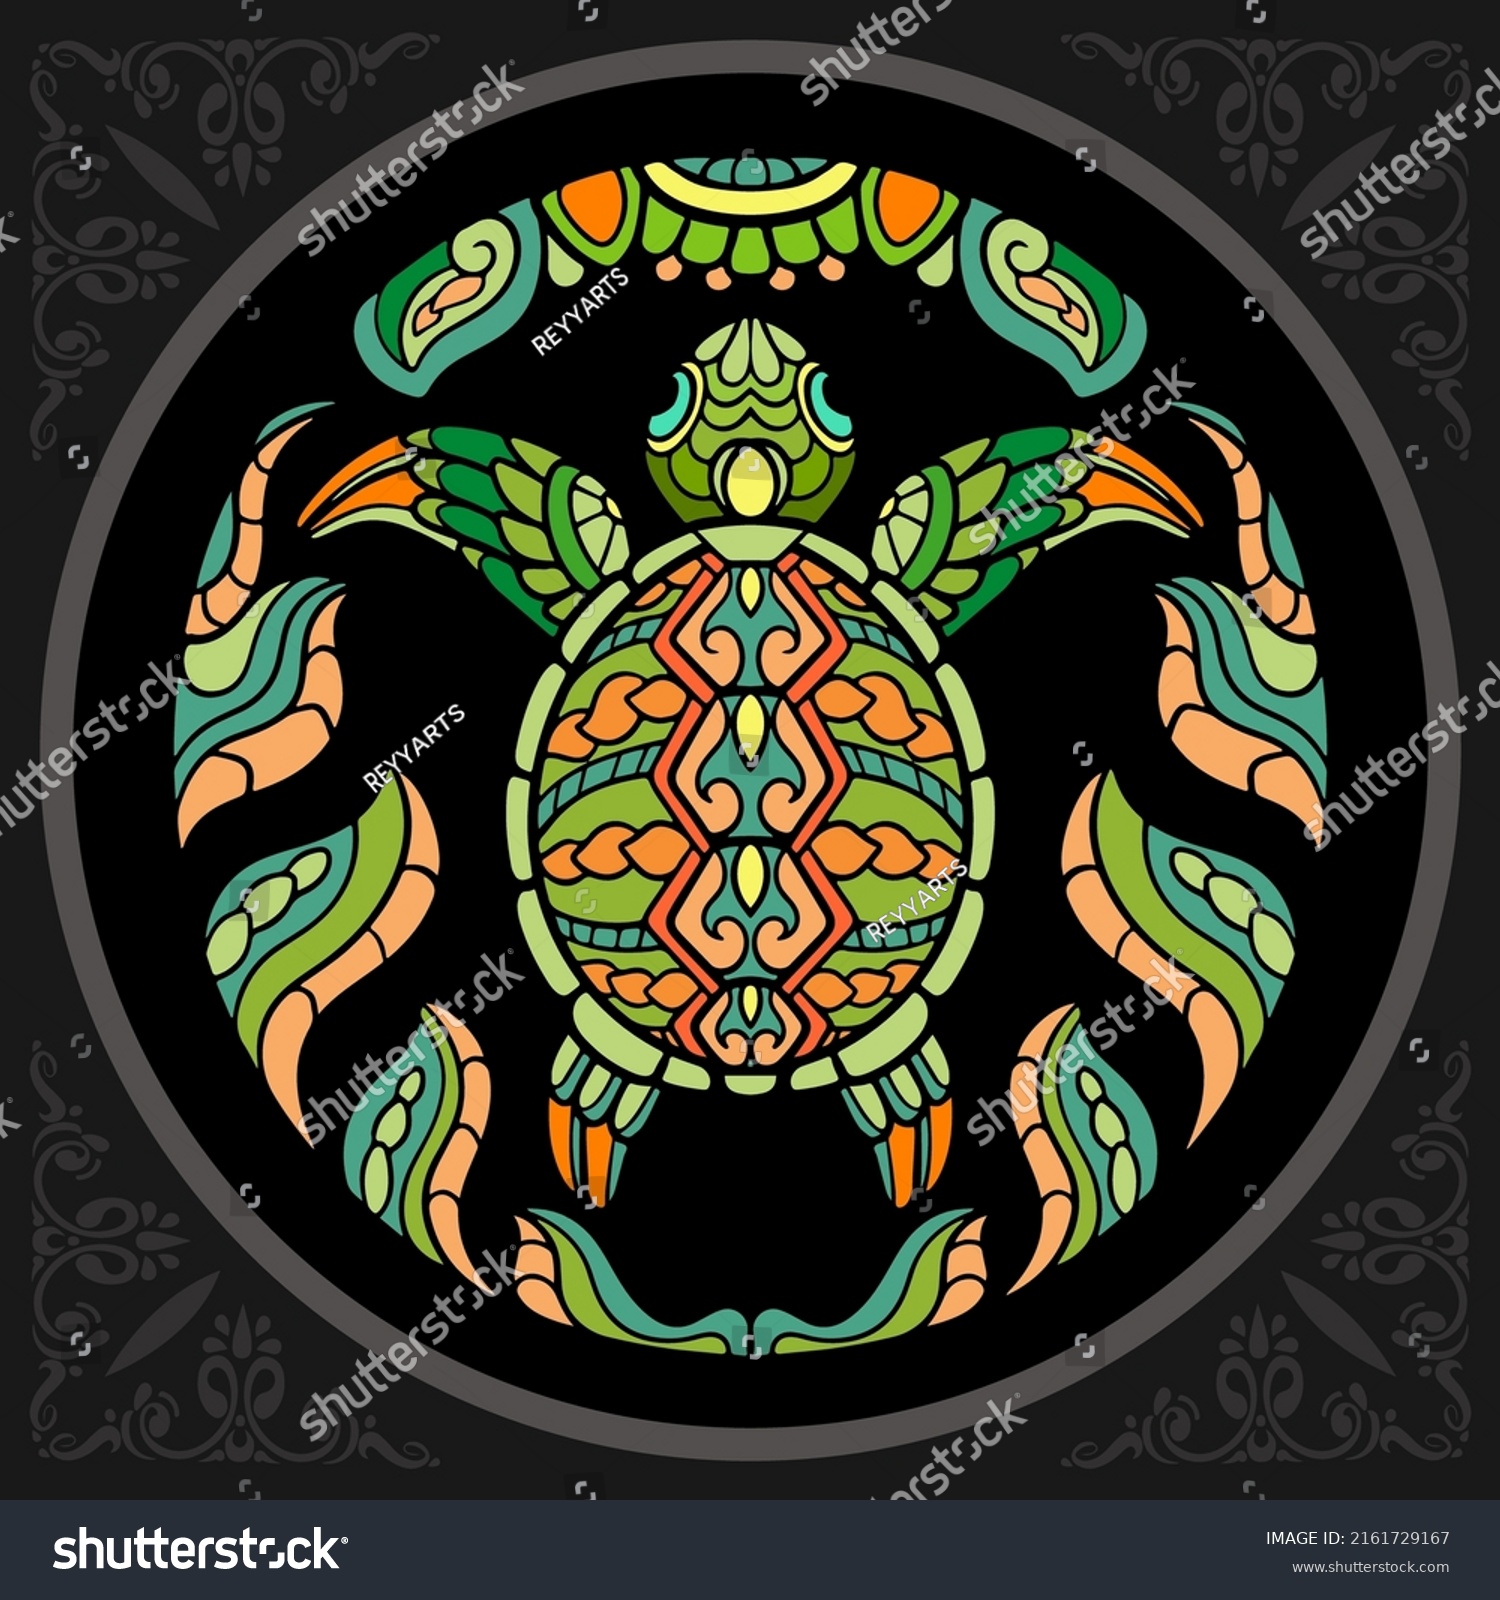 SVG of Colorful sea turtle zentangle arts. isolated on black background. svg